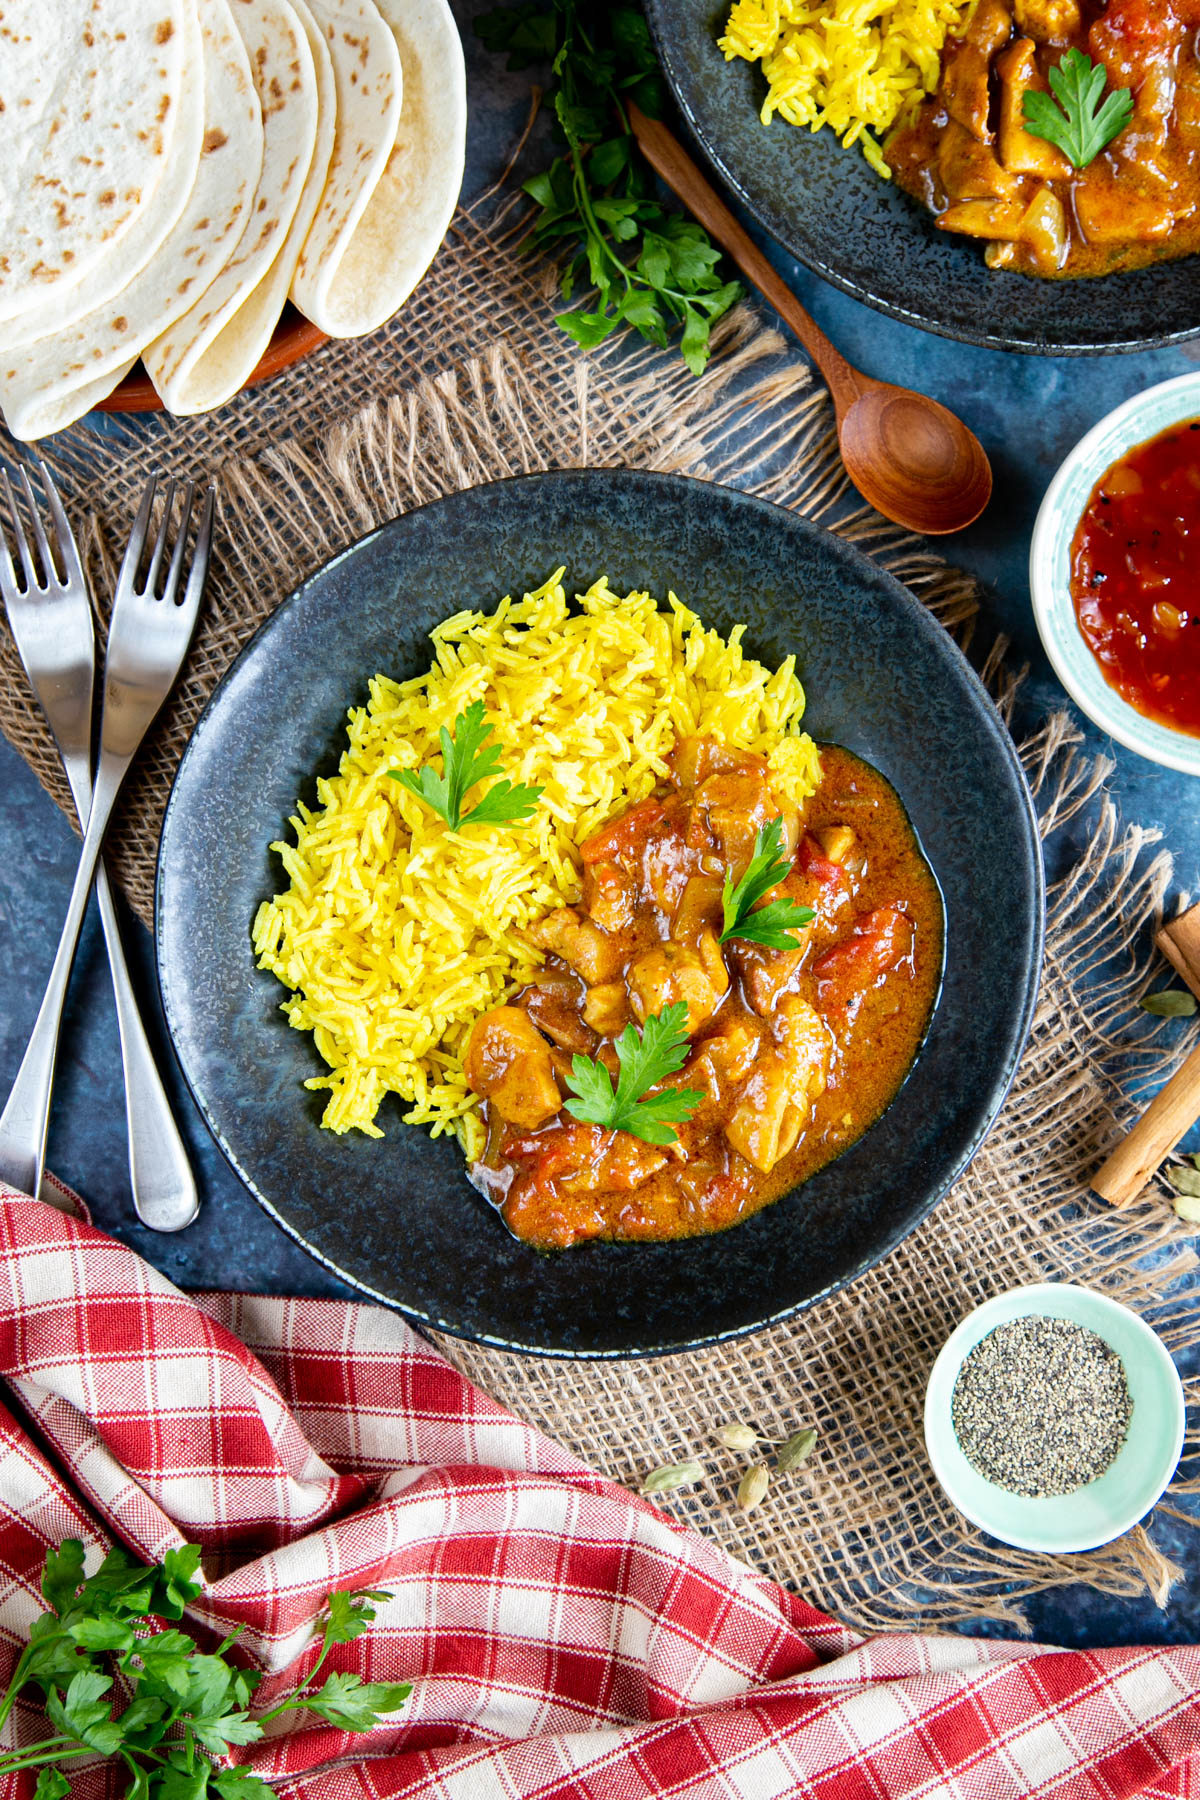 Delicious slow cooker curry in a black bowl, served with yellow pilau rice. The curry has been garnished with coriander leaves, and is served with flatbreads and a small dish of mango chutney. Spices, cloths, forks surround the bowl.